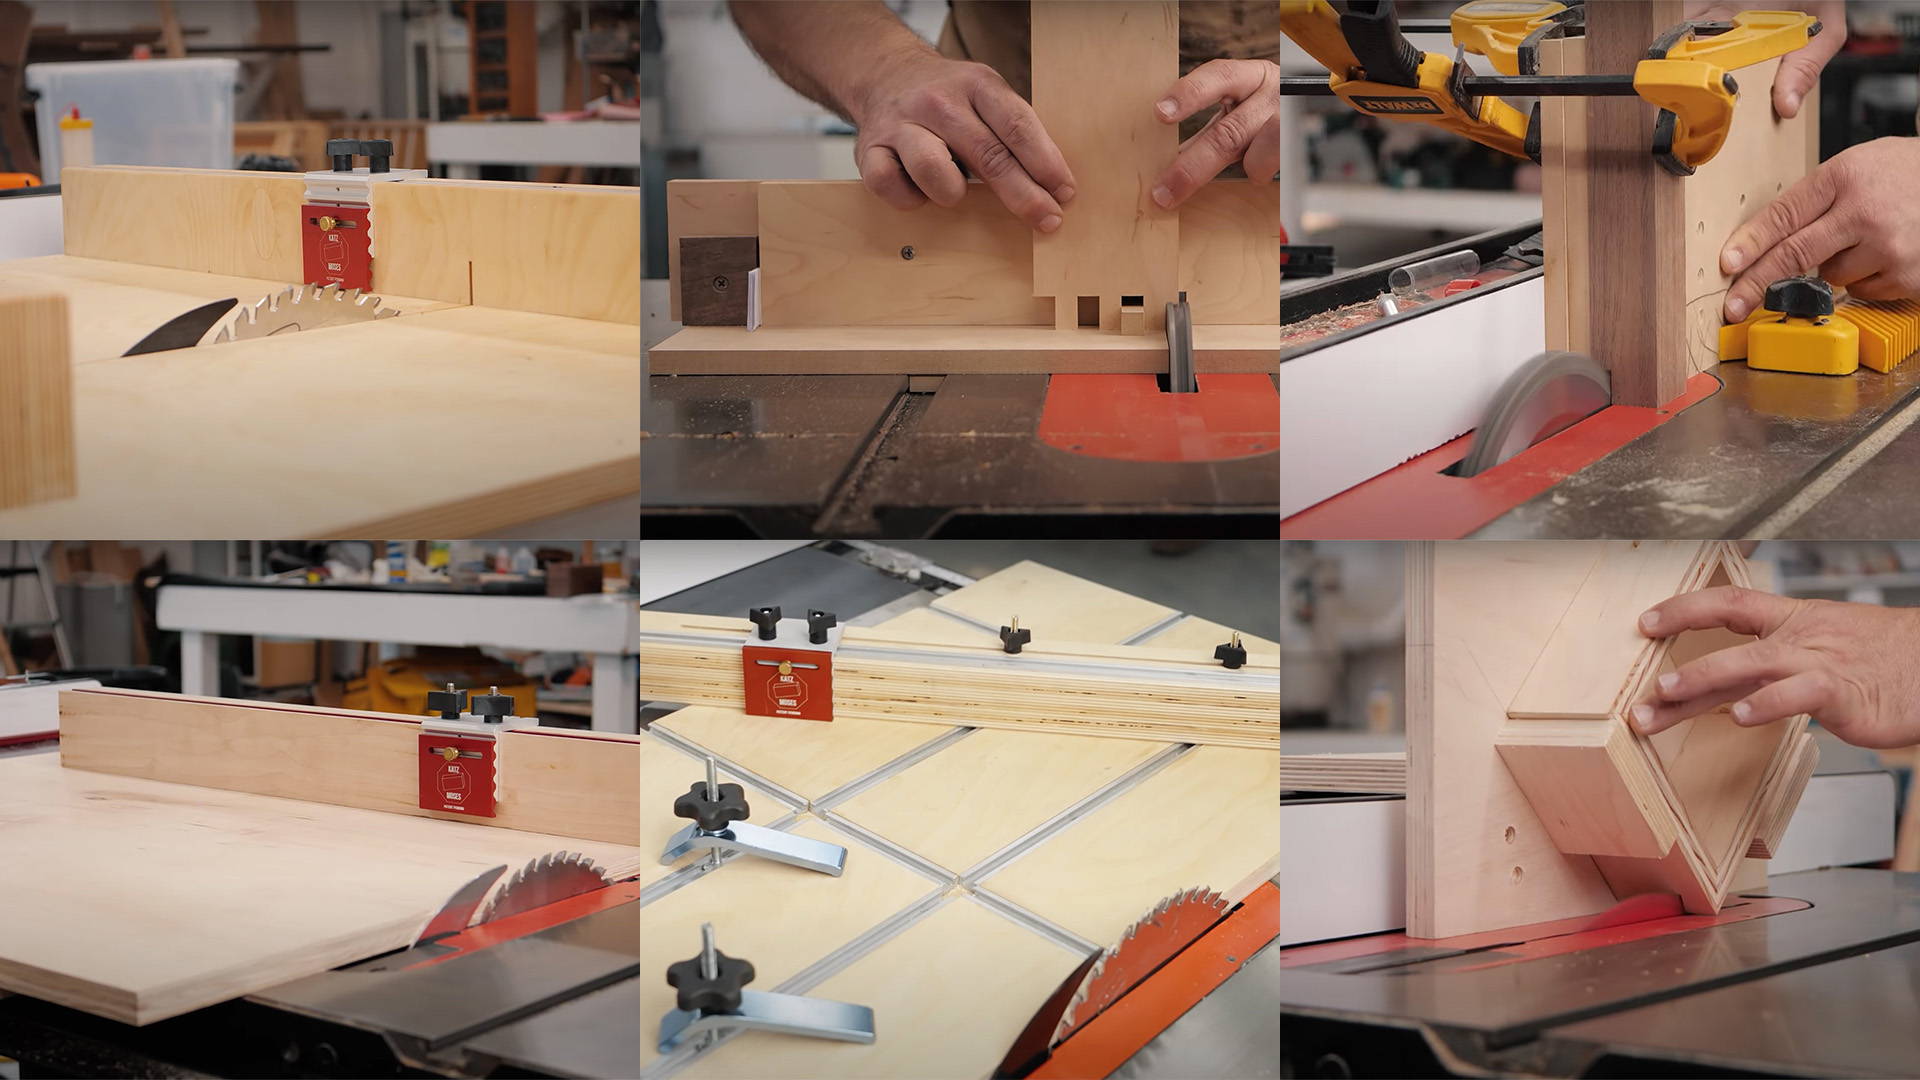 Top 6 Table Saw Sleds: My Most Used Jigs for Joinery and General Cuts